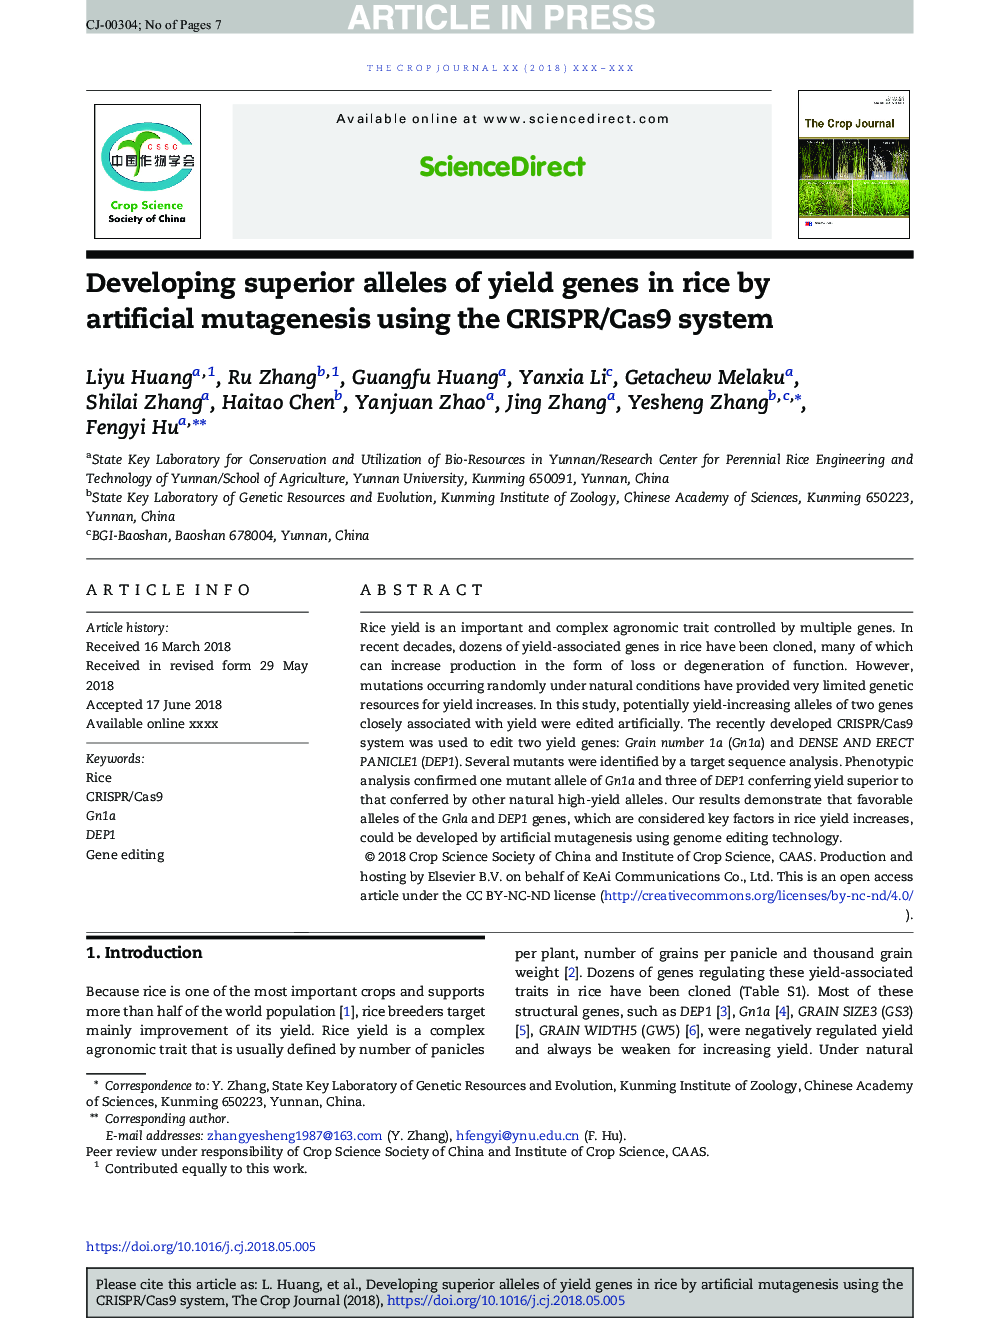 Developing superior alleles of yield genes in rice by artificial mutagenesis using the CRISPR/Cas9 system